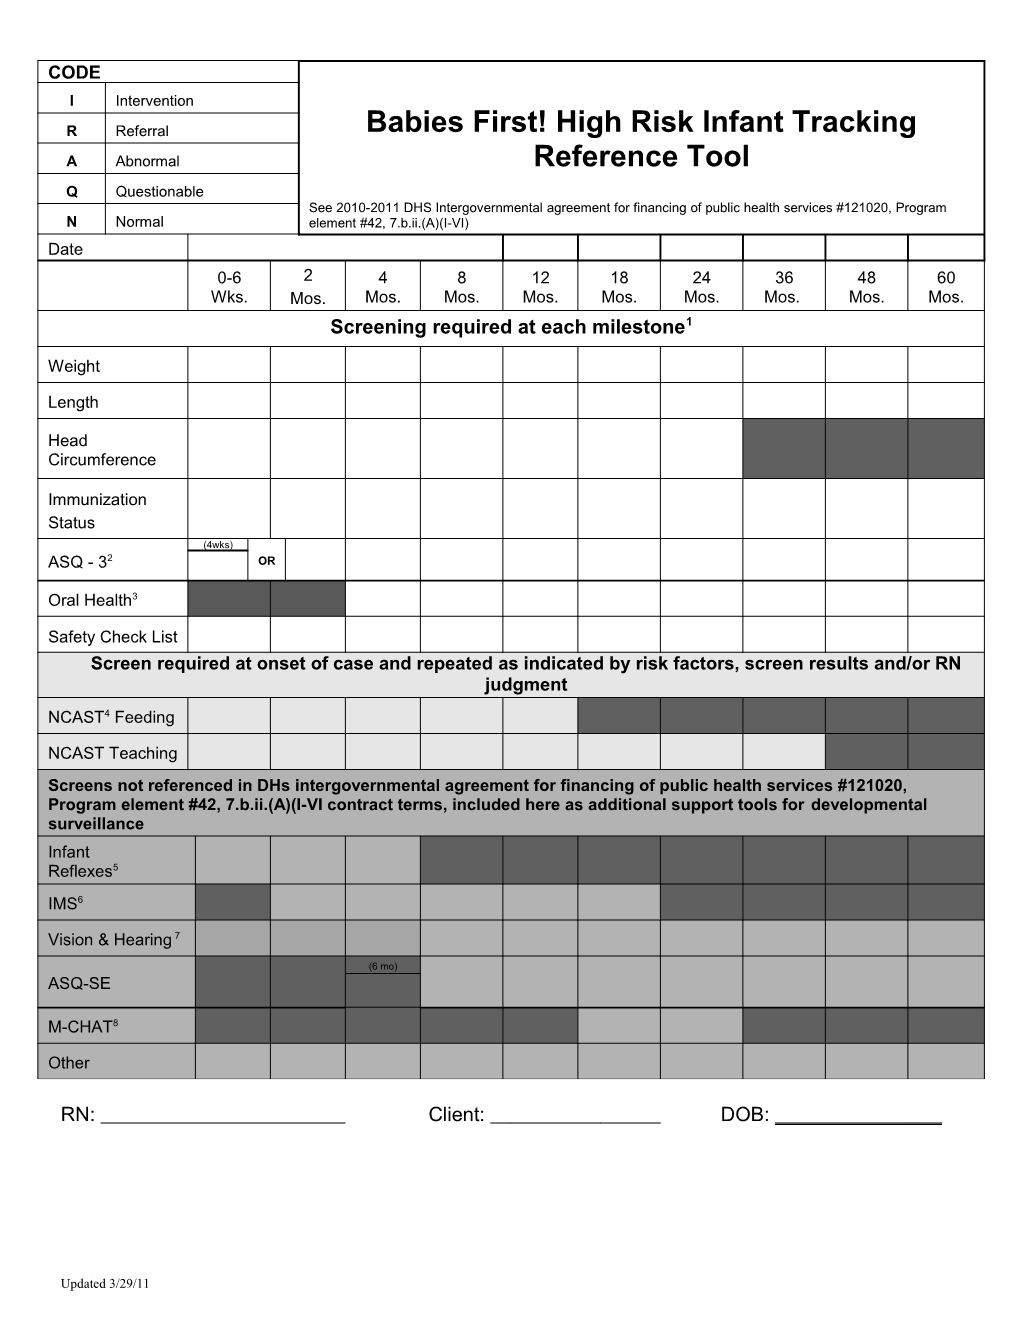 Babies First! High Risk Infant Tracking Screening Flow Sheet